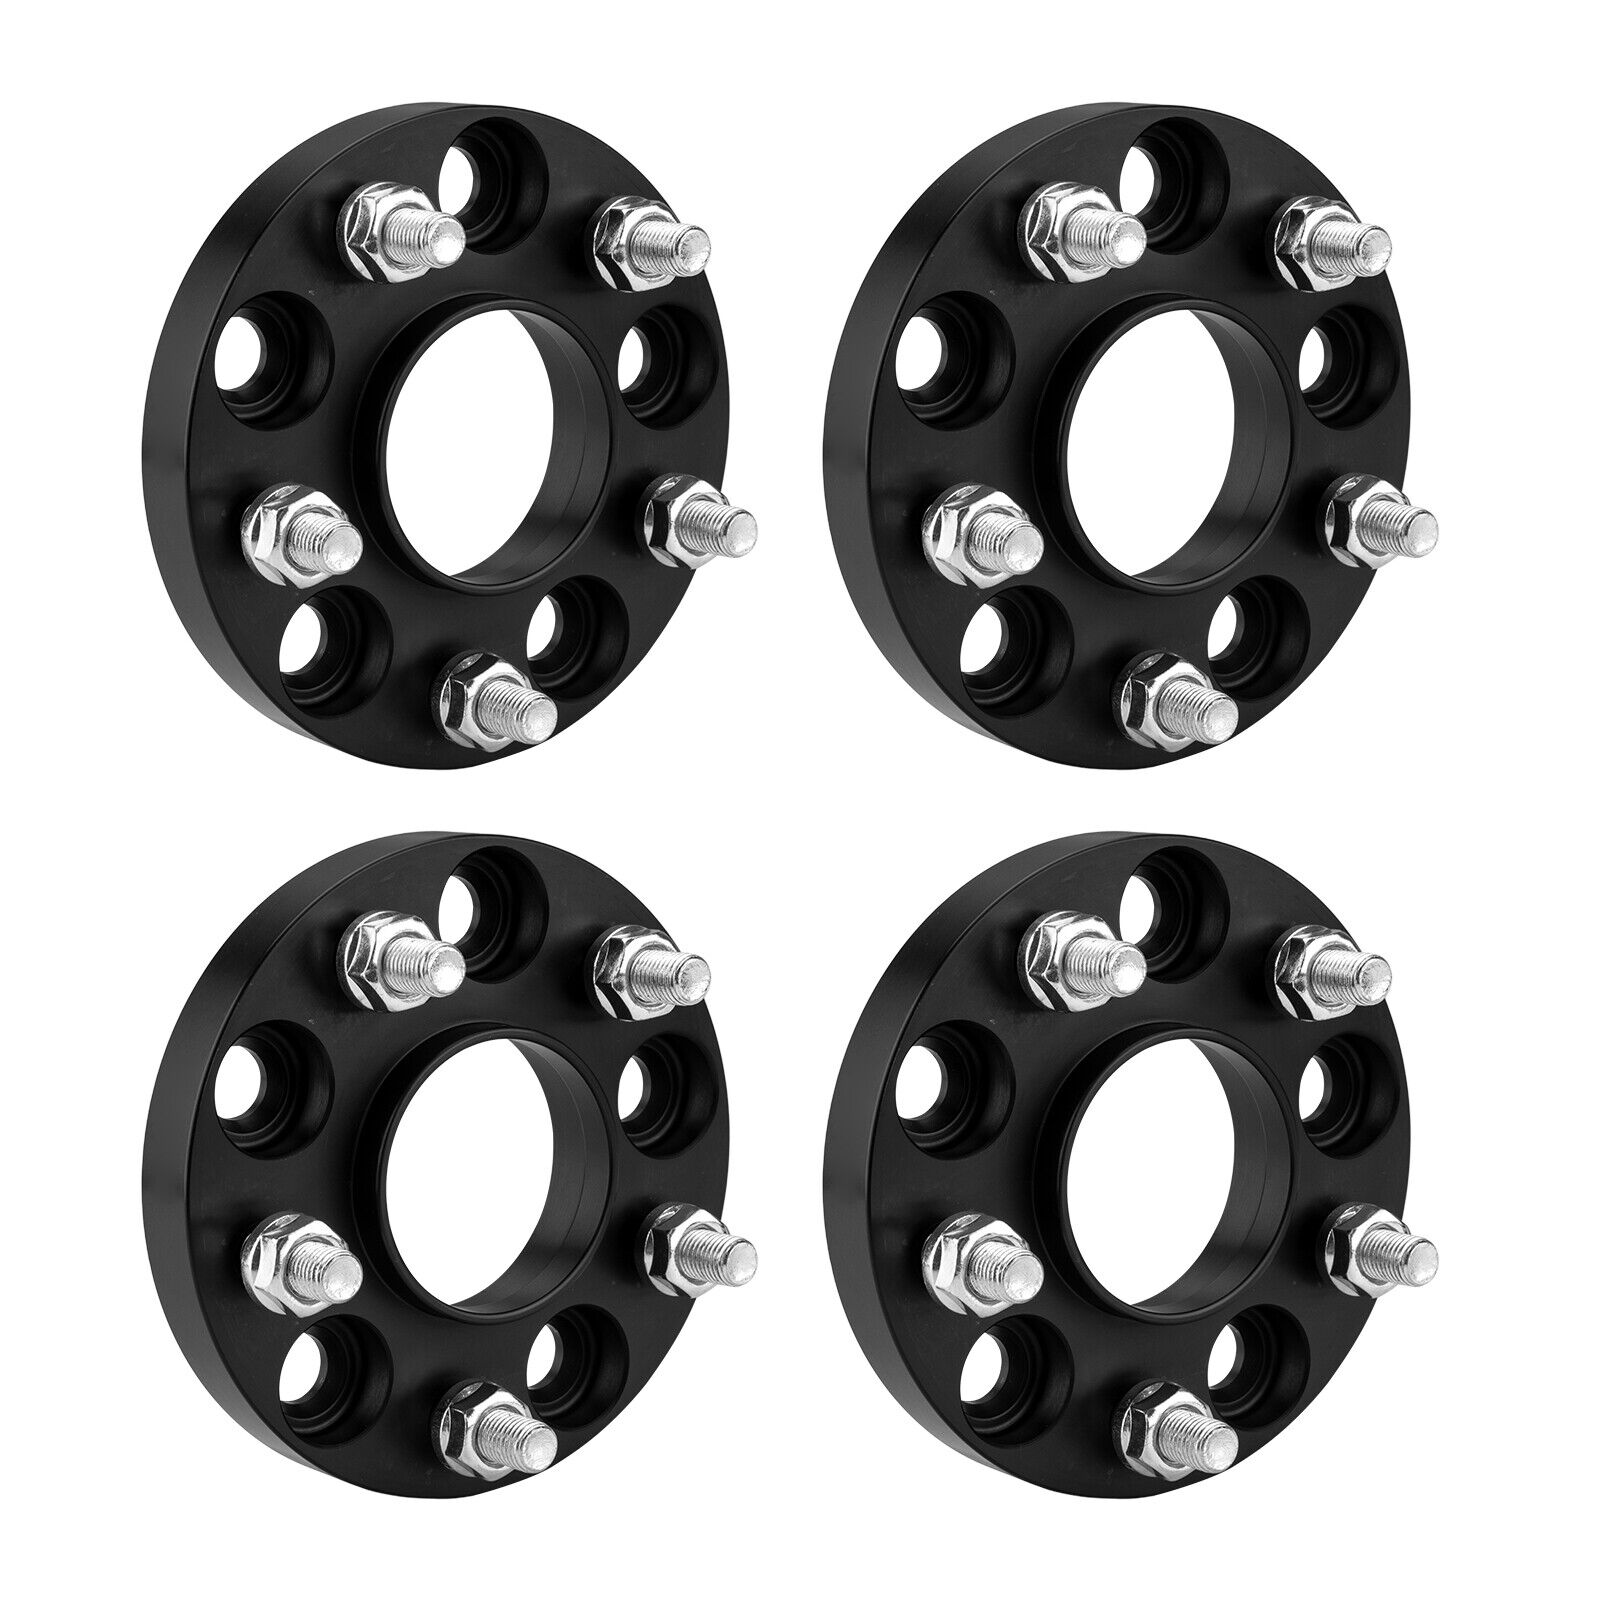 4pcs 20mm 5x114.3mm M12x1.5 67.1mm wheel spacers for  Hyundai Genesis Coupe